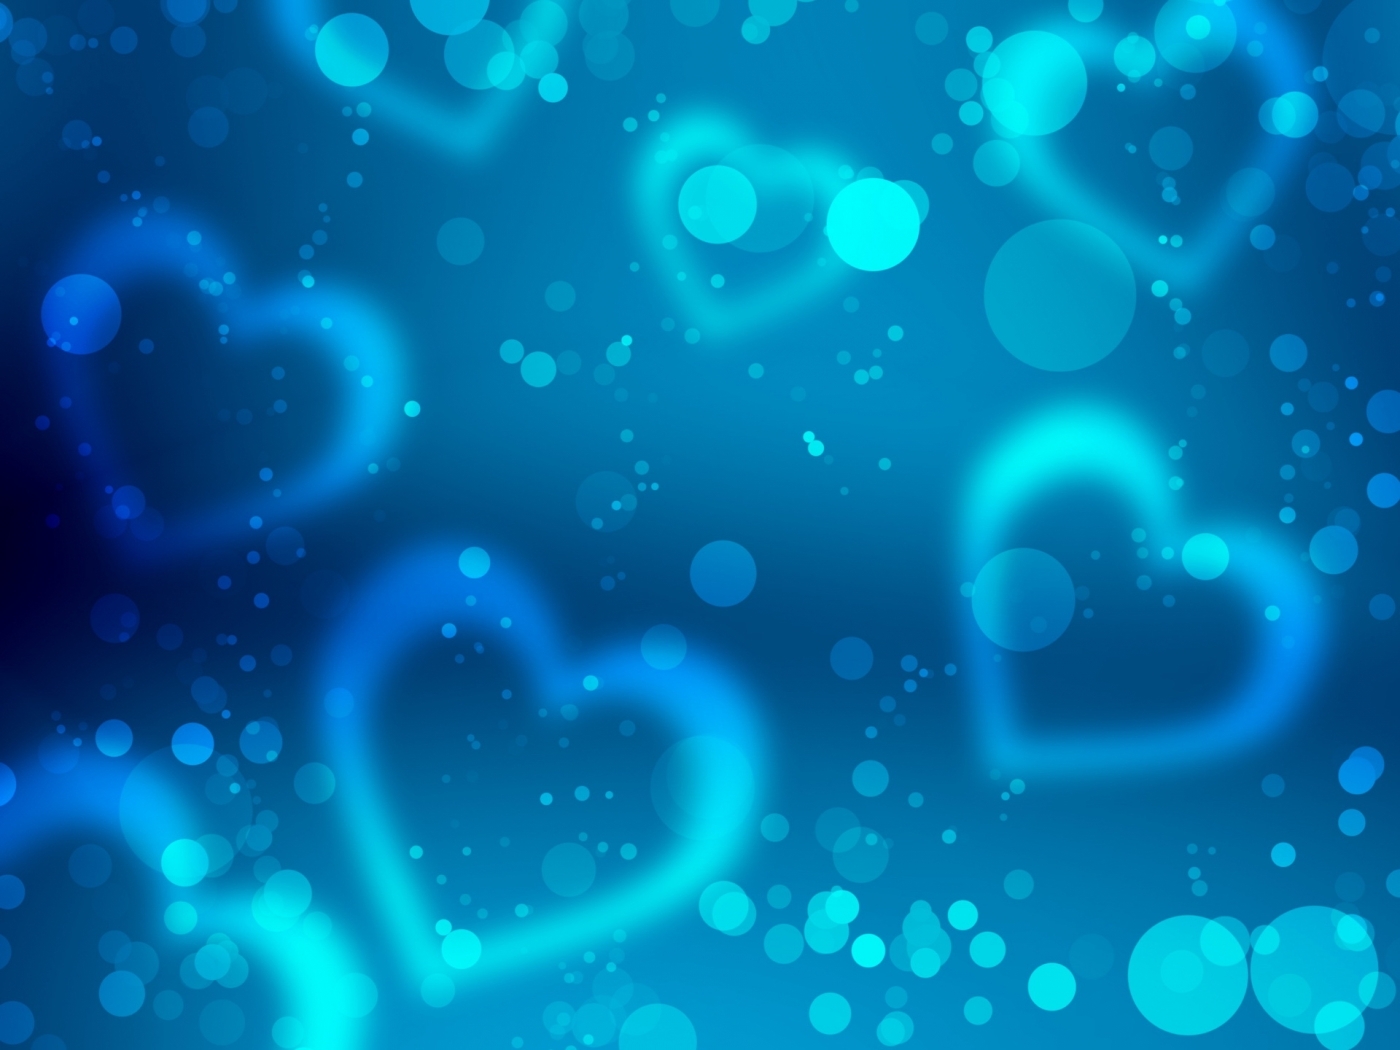 Wallpaper Full HD background, hearts, love, turquoise